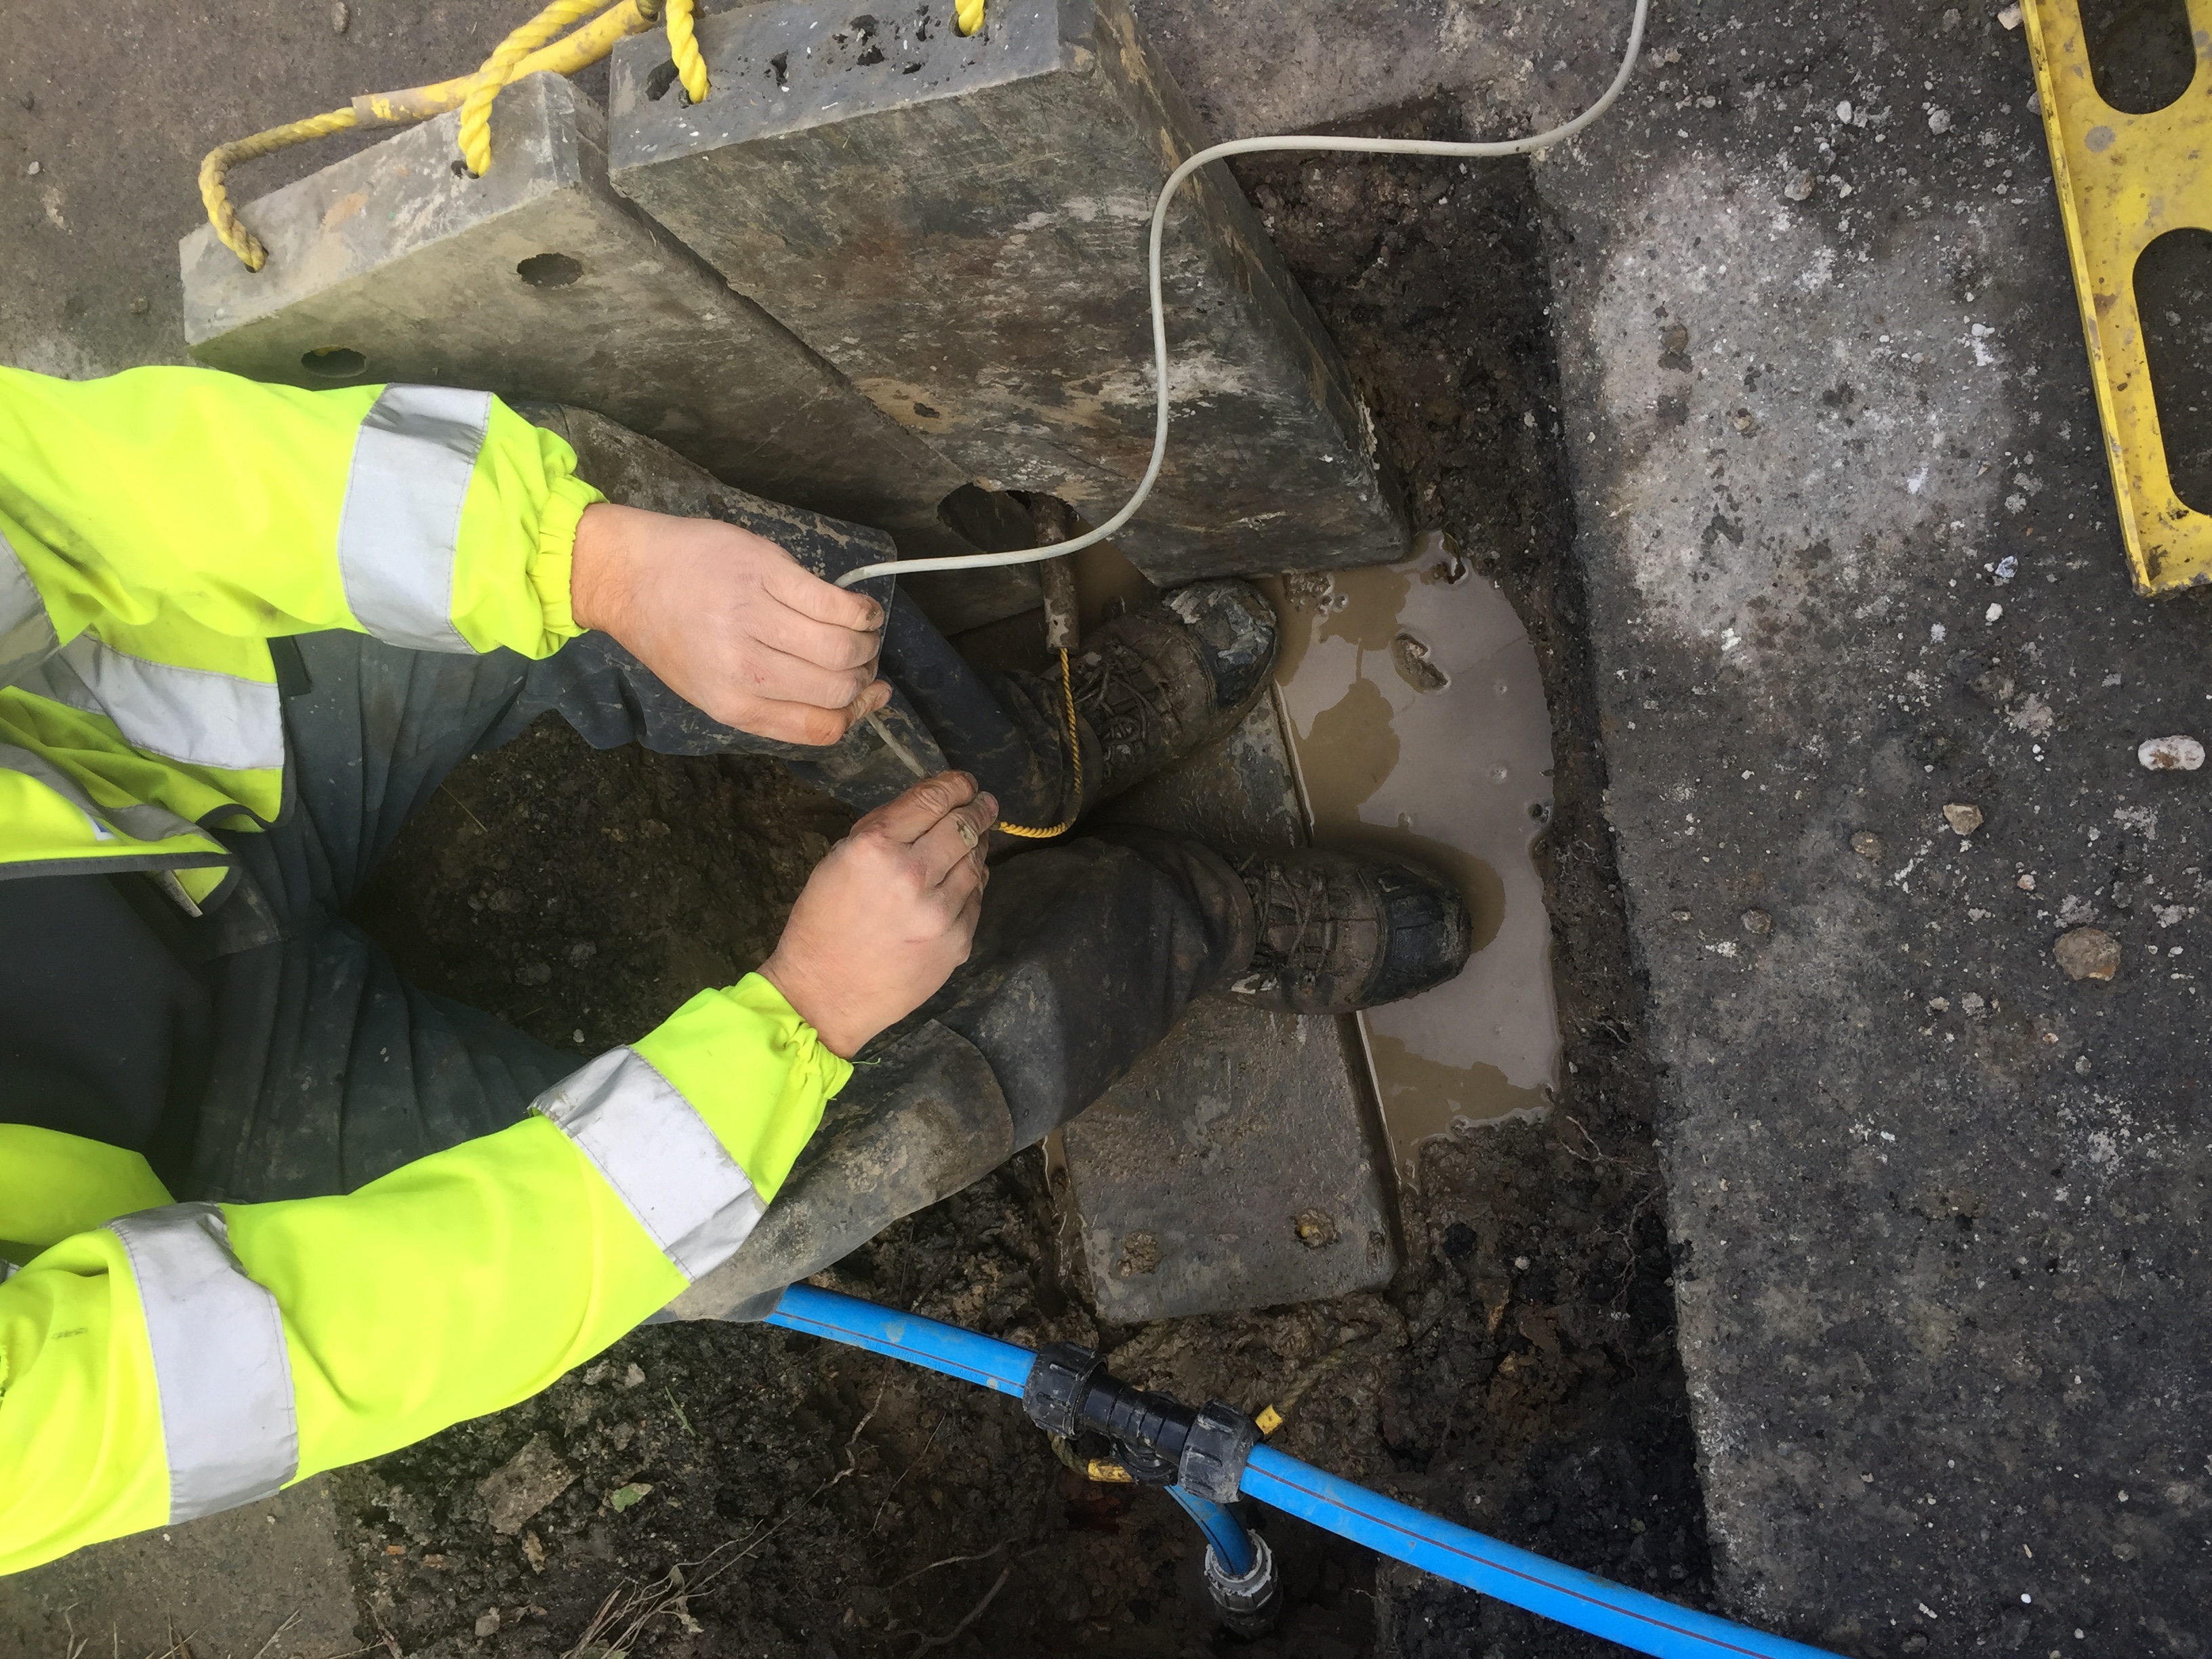 Reducing the risk of utility strike in pipe repair and replacement